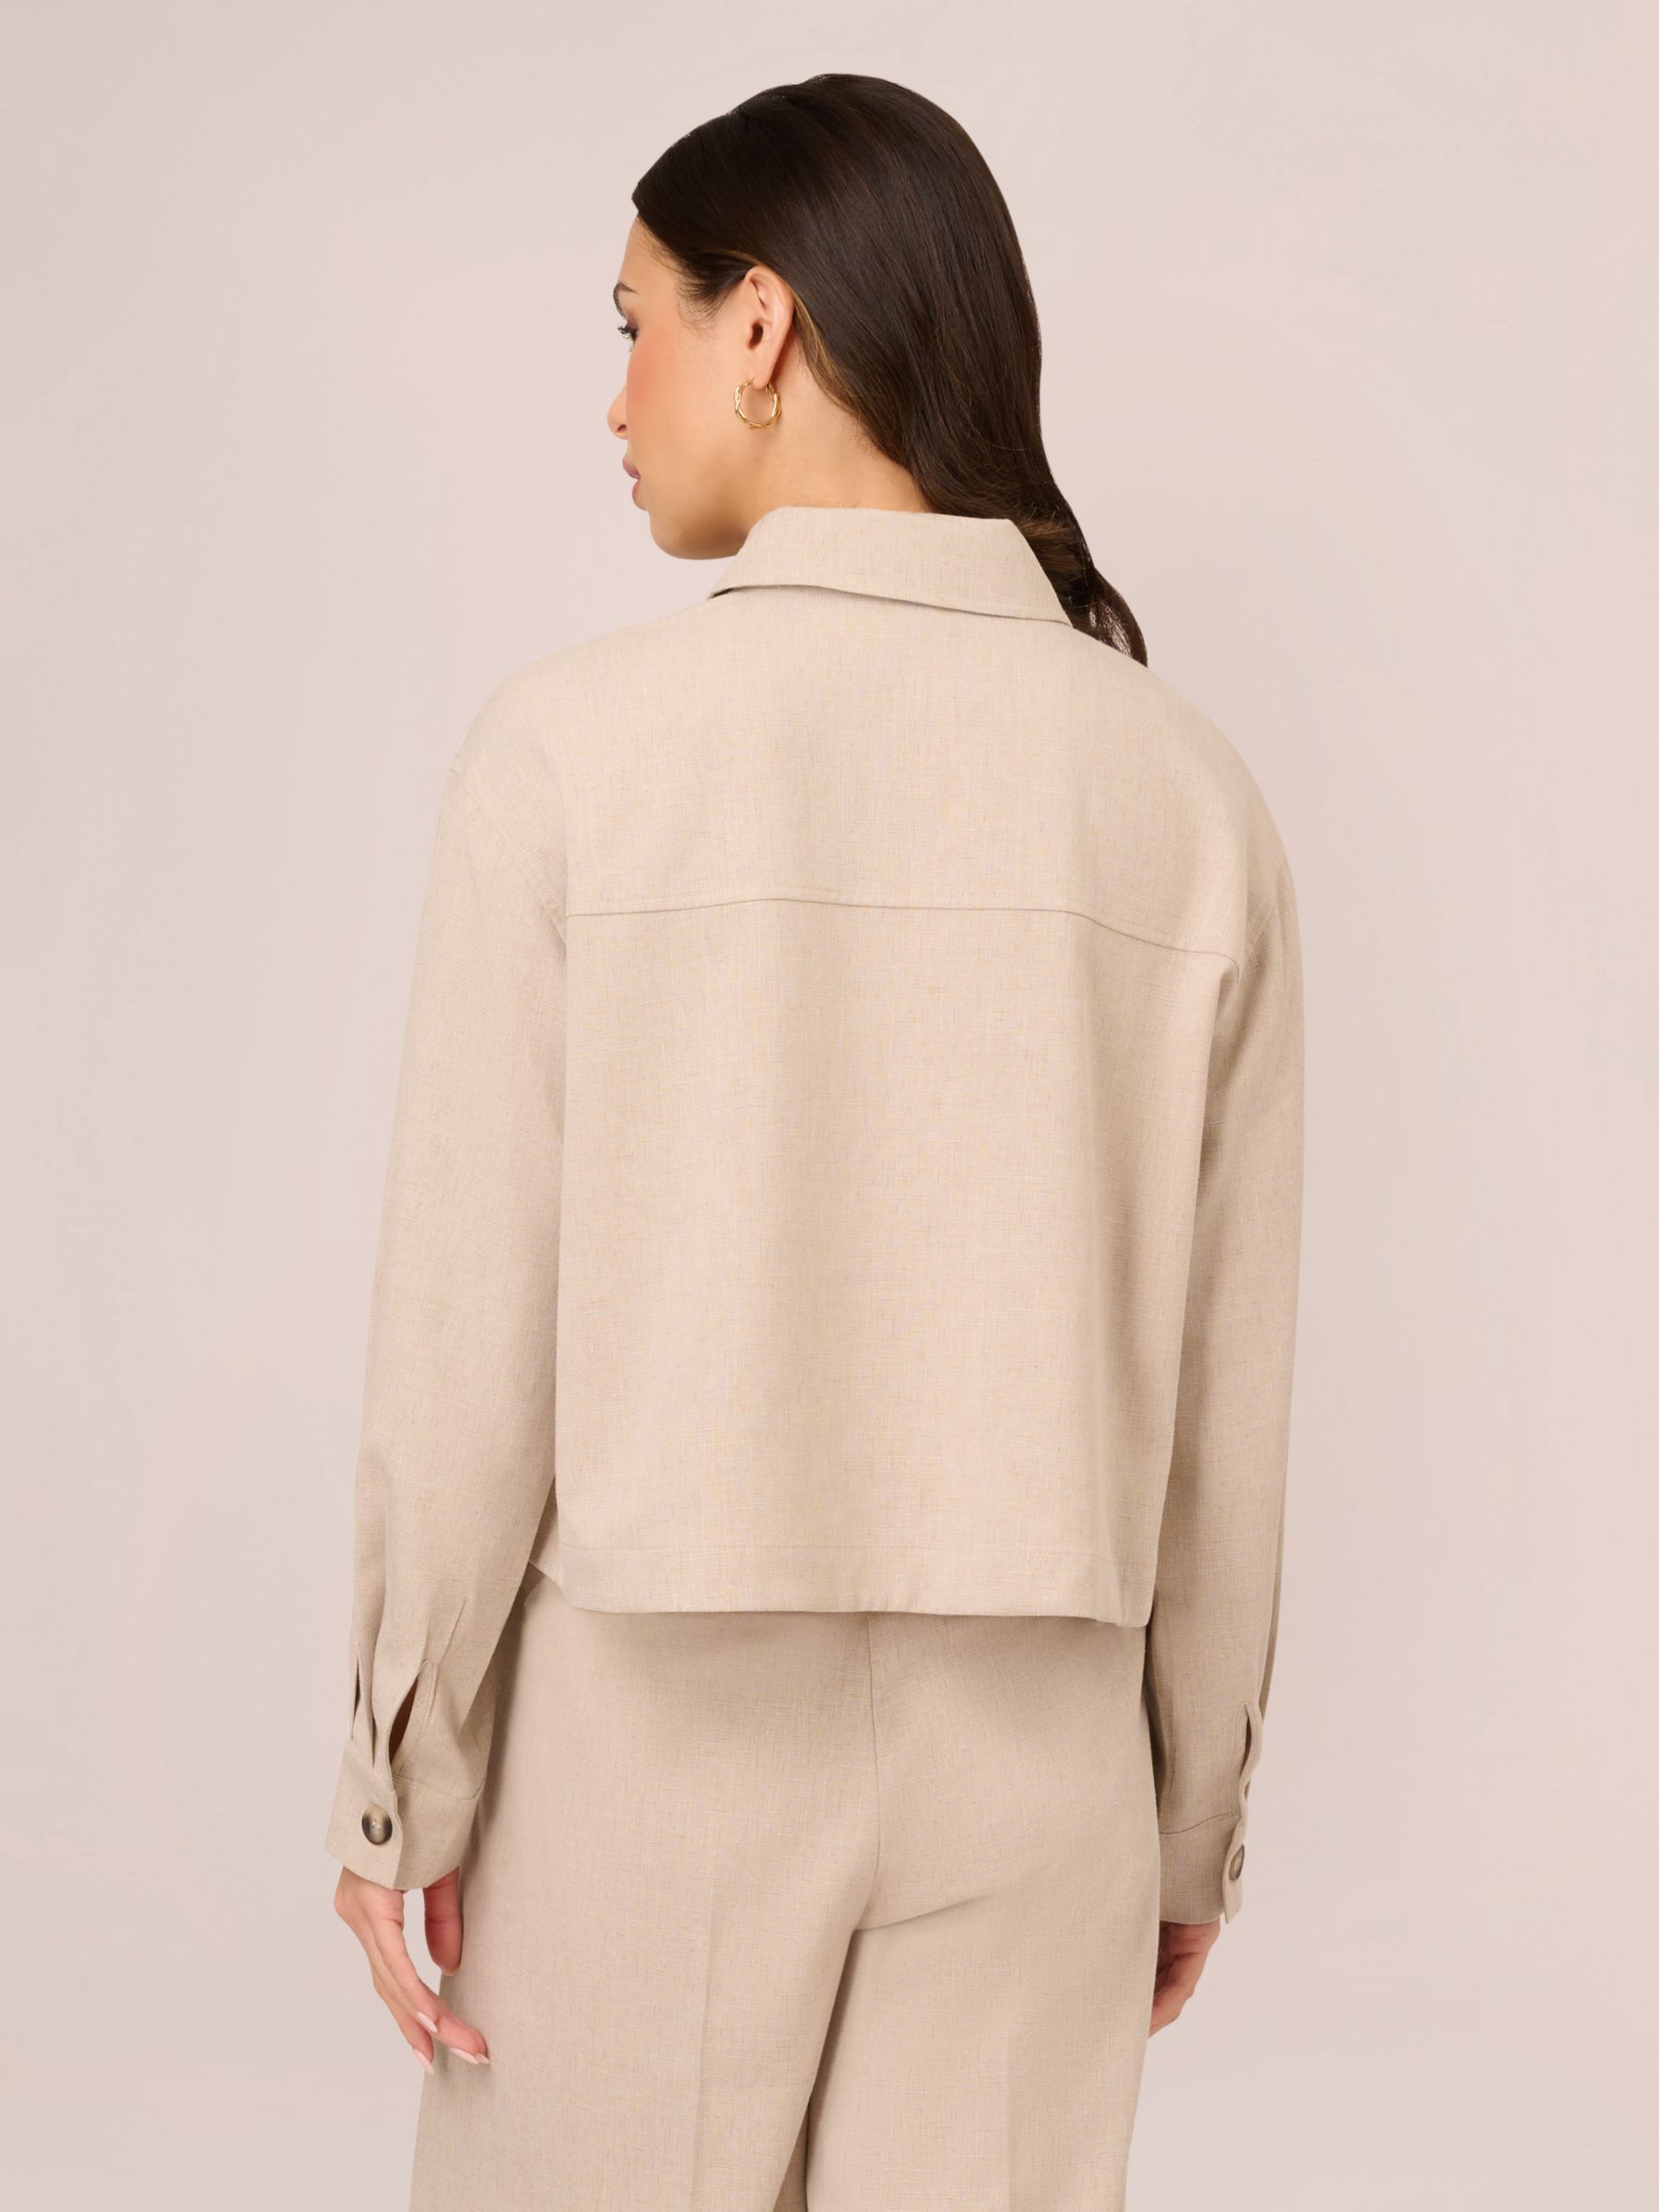 Buy Adrianna Papell Button Up Utility Jacket, Flax Online at johnlewis.com